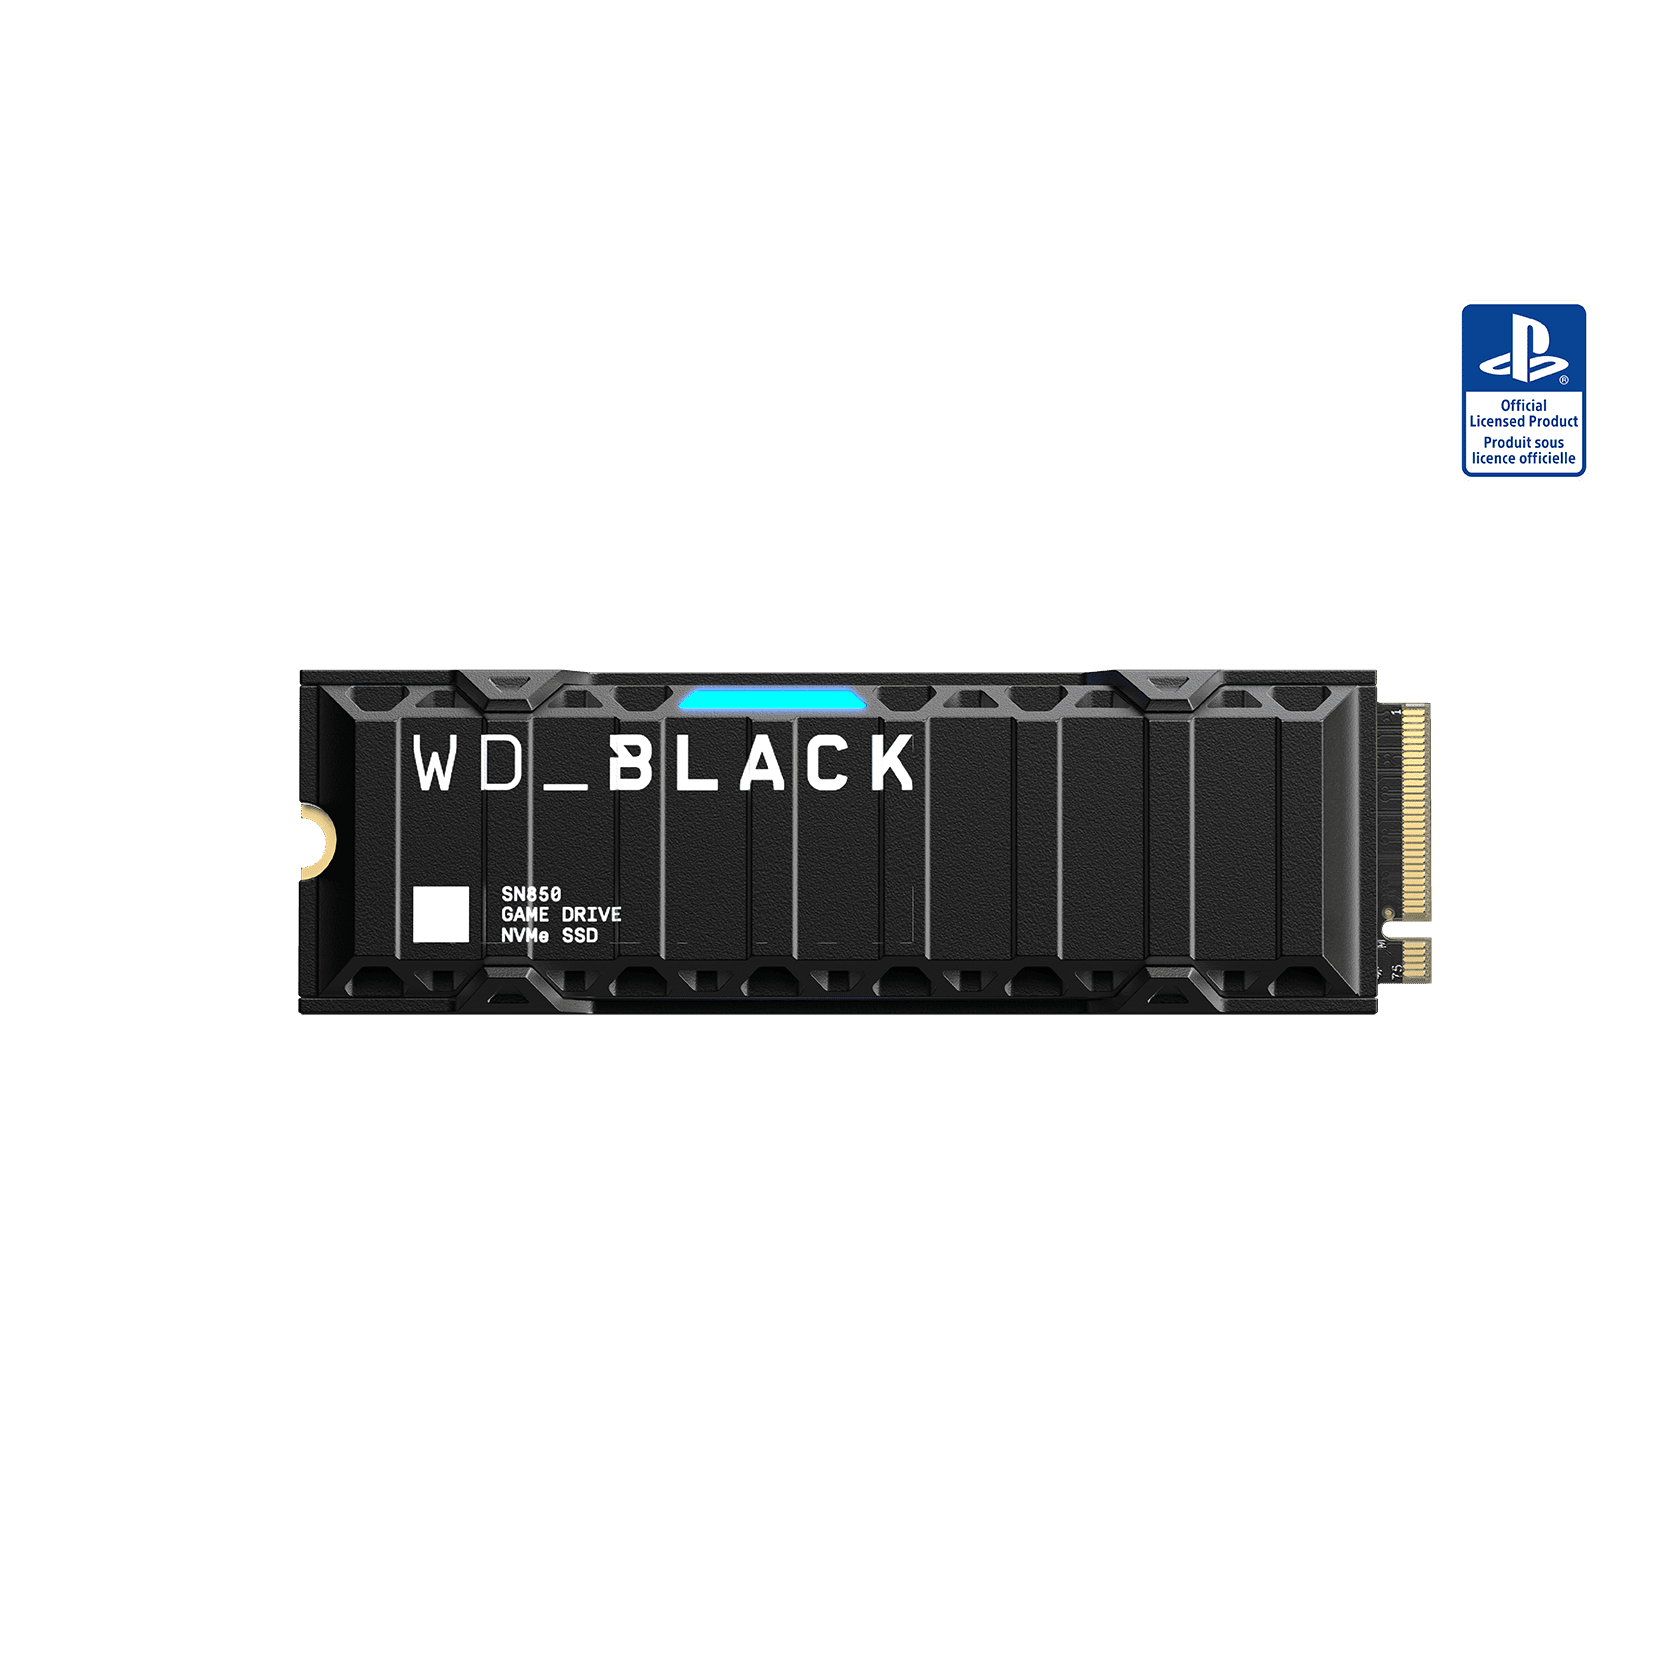 WD_BLACK 2TB SN850 NVMe SSD, Internal M.2 2280 Solid State Drive for PS5  Consoles - WDBBKW0020BBK-WRSN